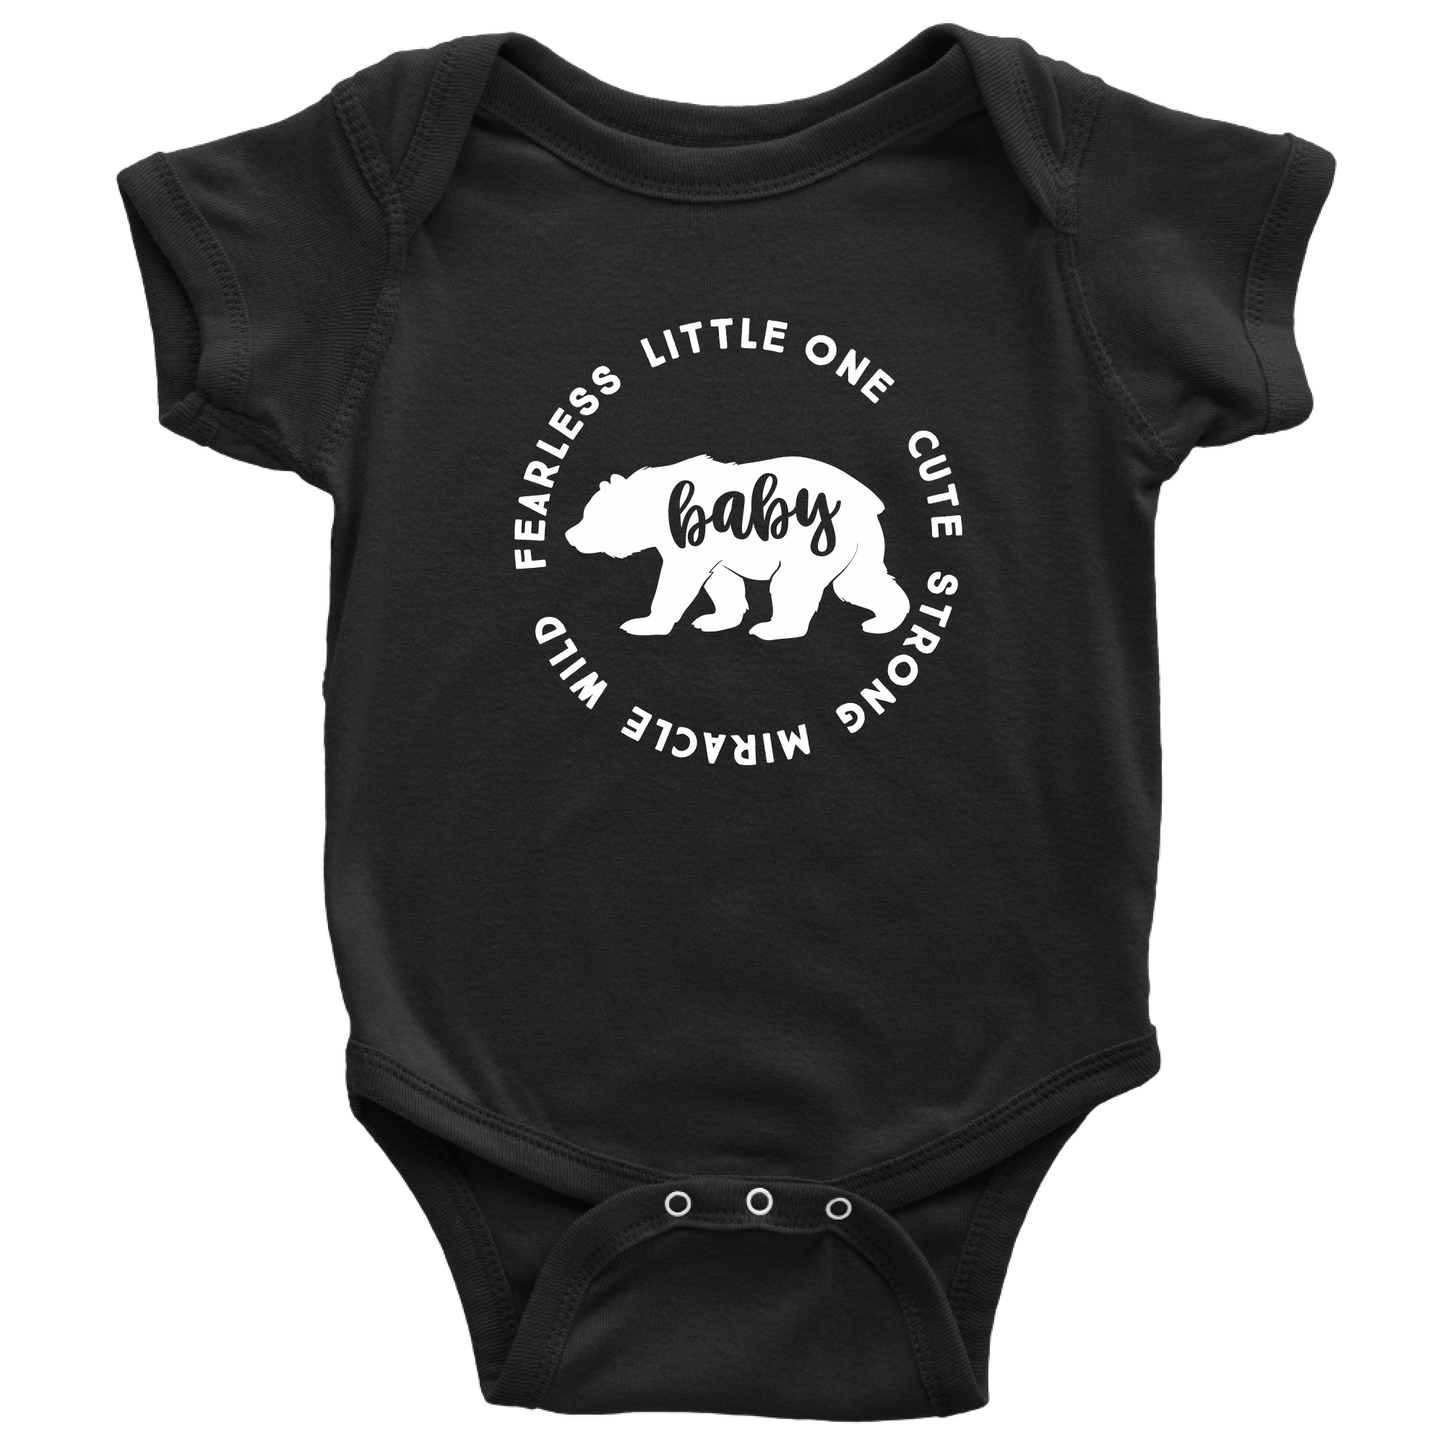 Father Bear Baby Bear Matching Shirts For Dad and Baby Father's day Dad's Birthday Gift